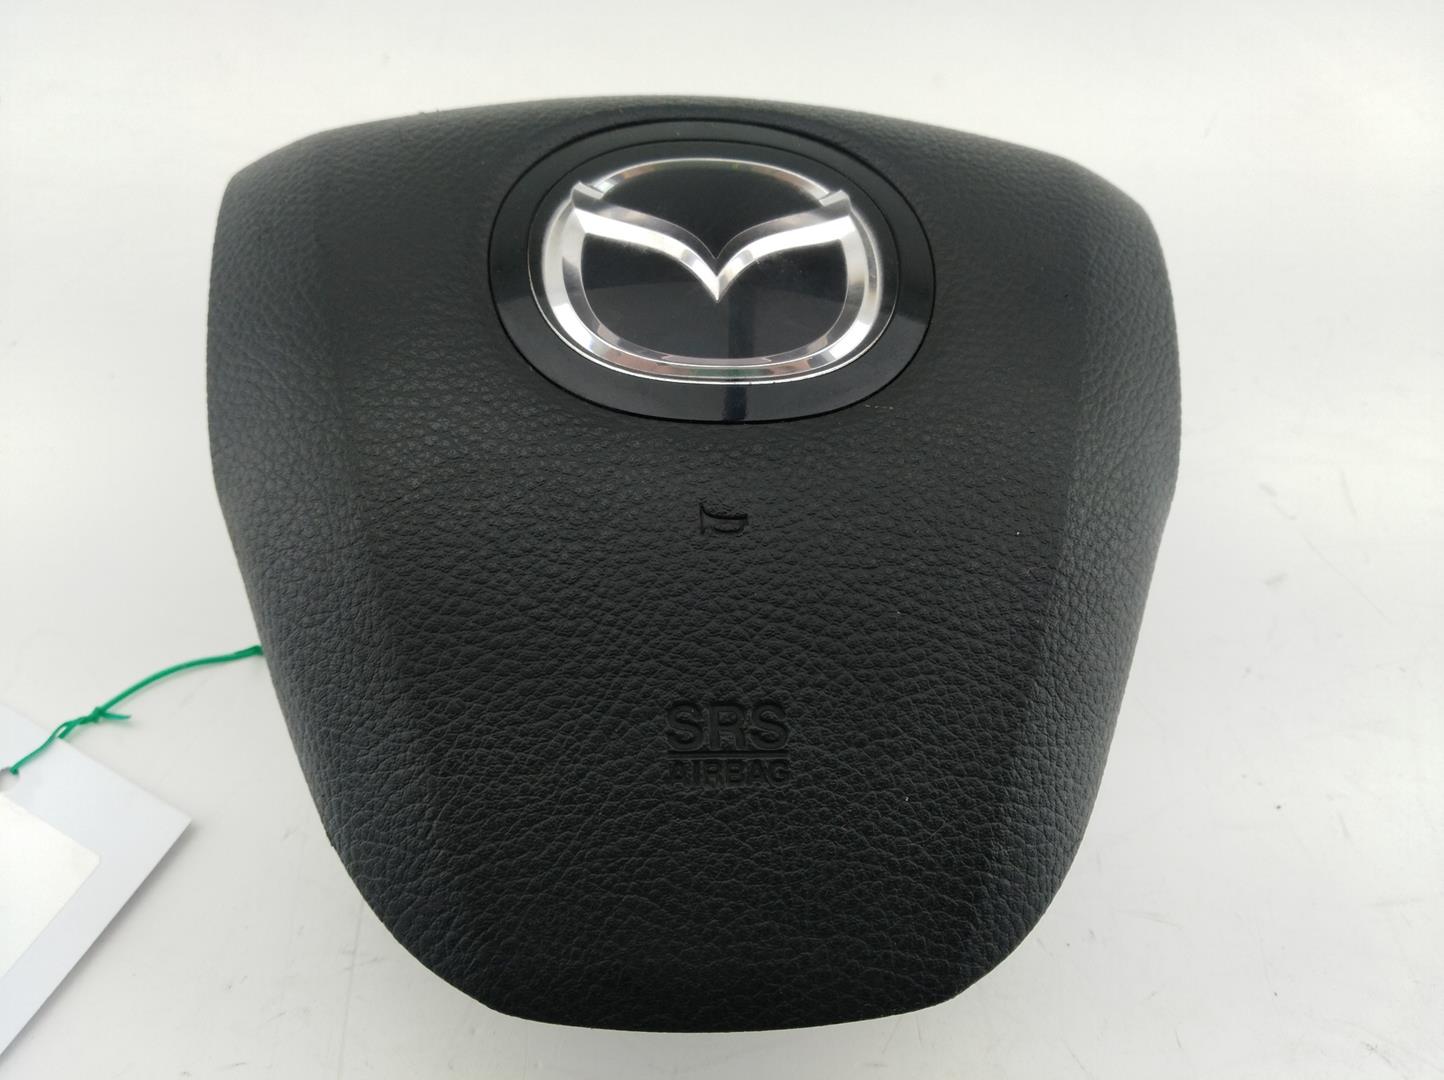 MAZDA CX-7 1 generation (2006-2012) Other Control Units EH6257K00, EH6257K00, EH6257K00 24666508